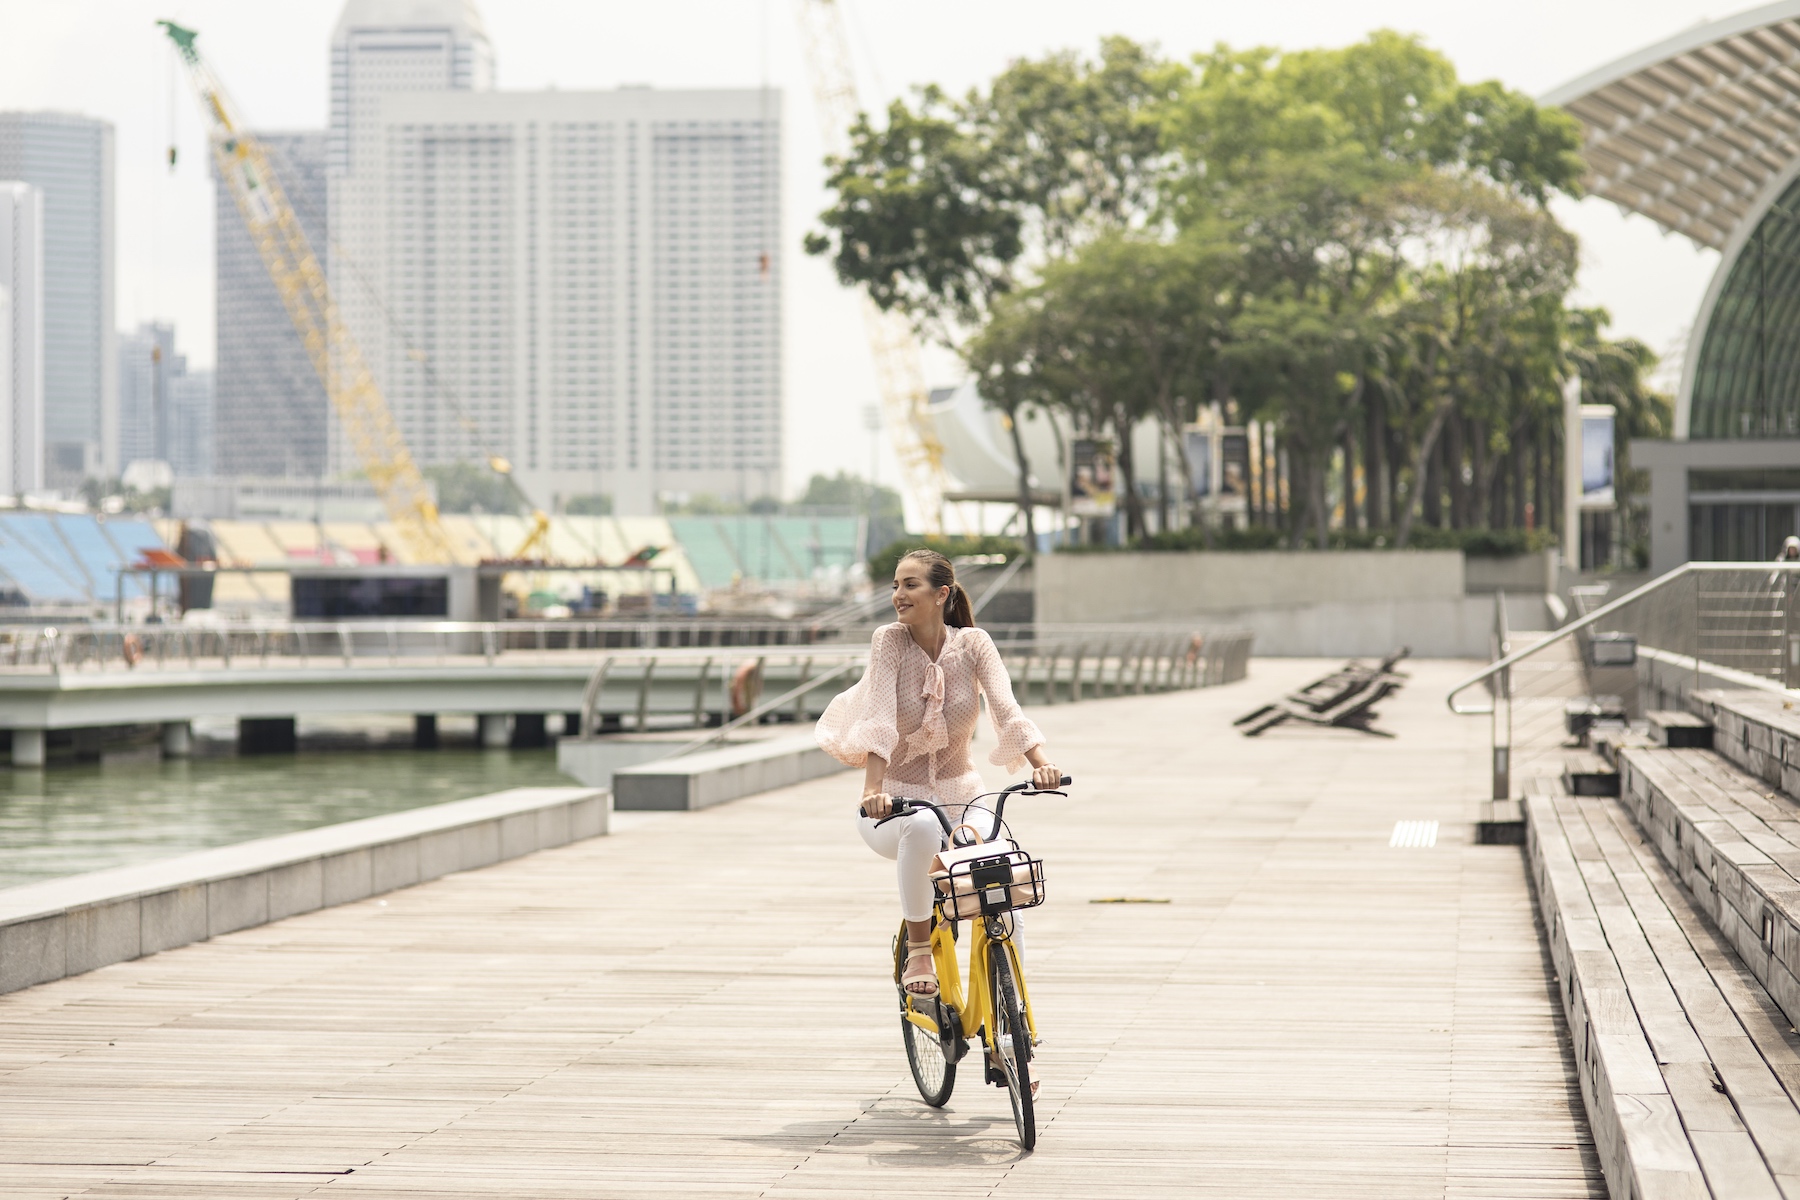 A woman rides a bike along the pier next to the water in Singapore on a bright sunny day